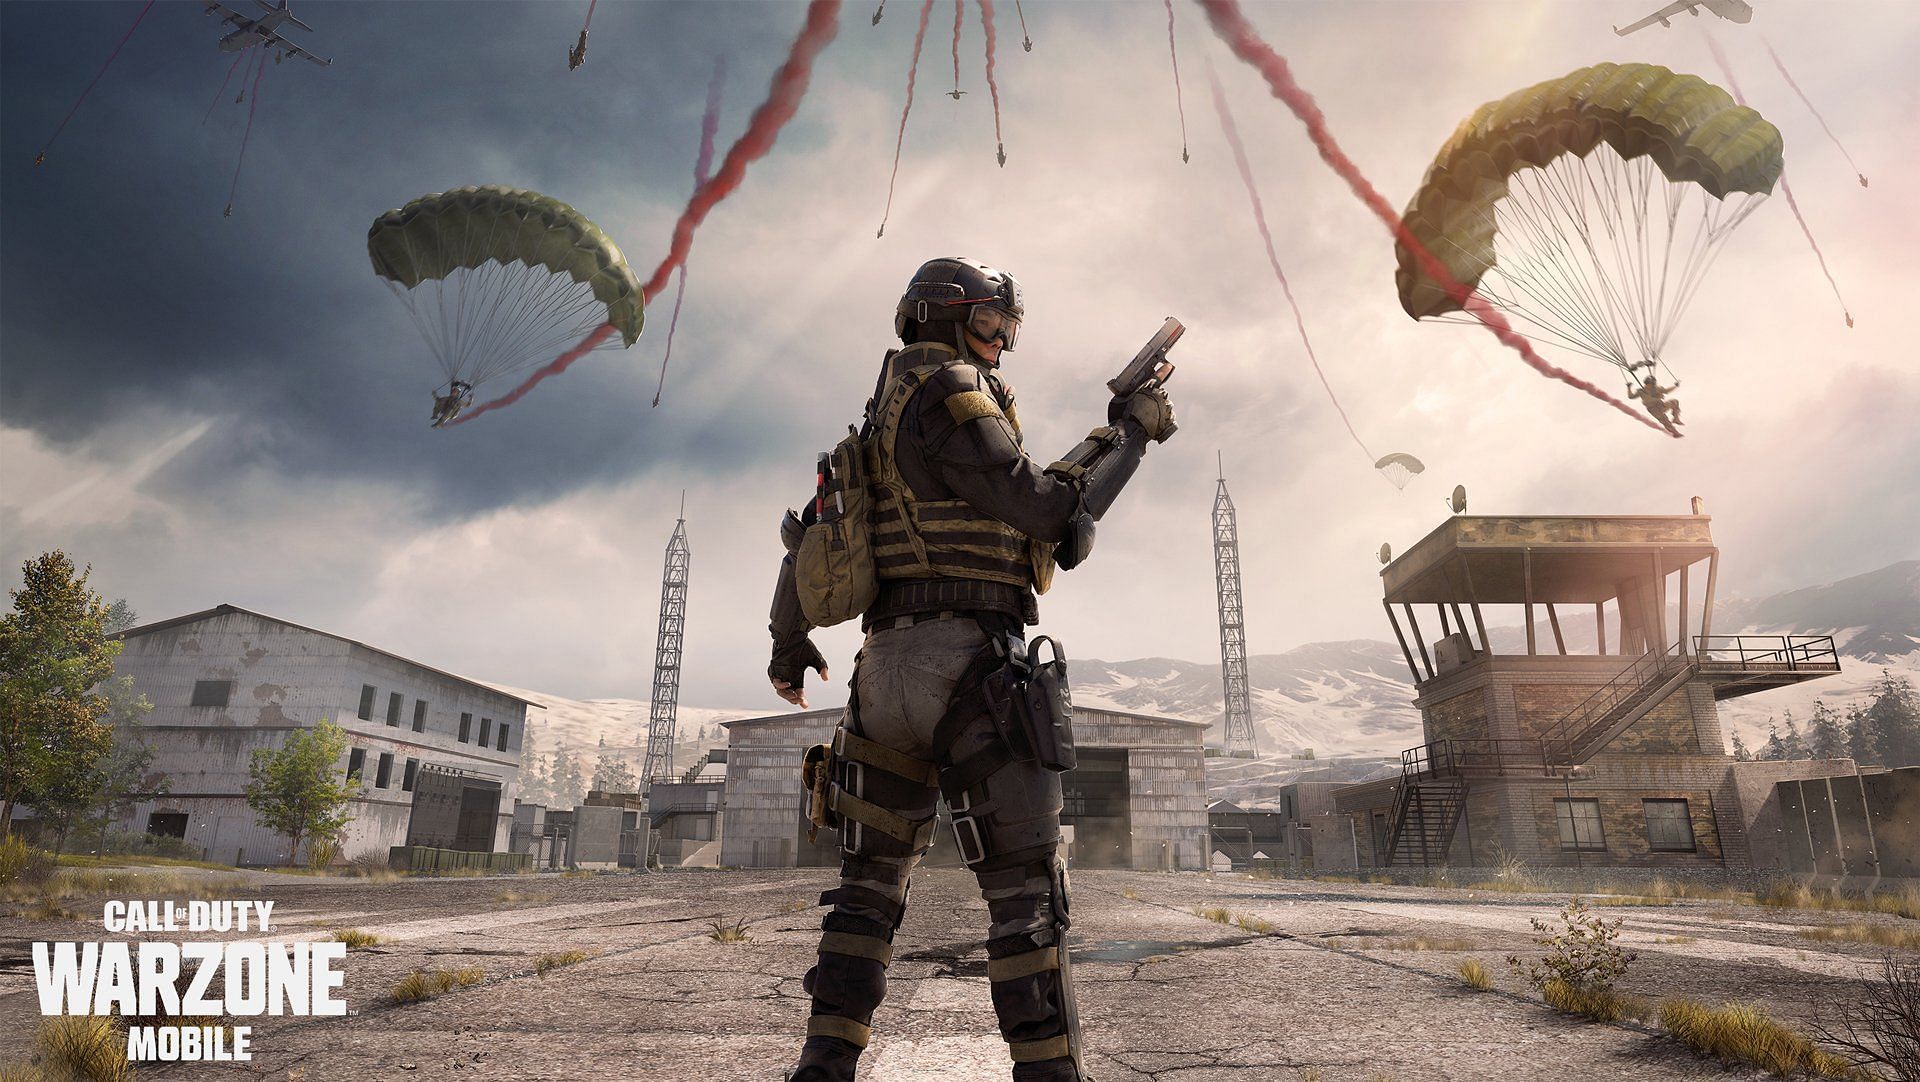 COD Next has revealed more information about Warzone Mobile (Image via Activision)